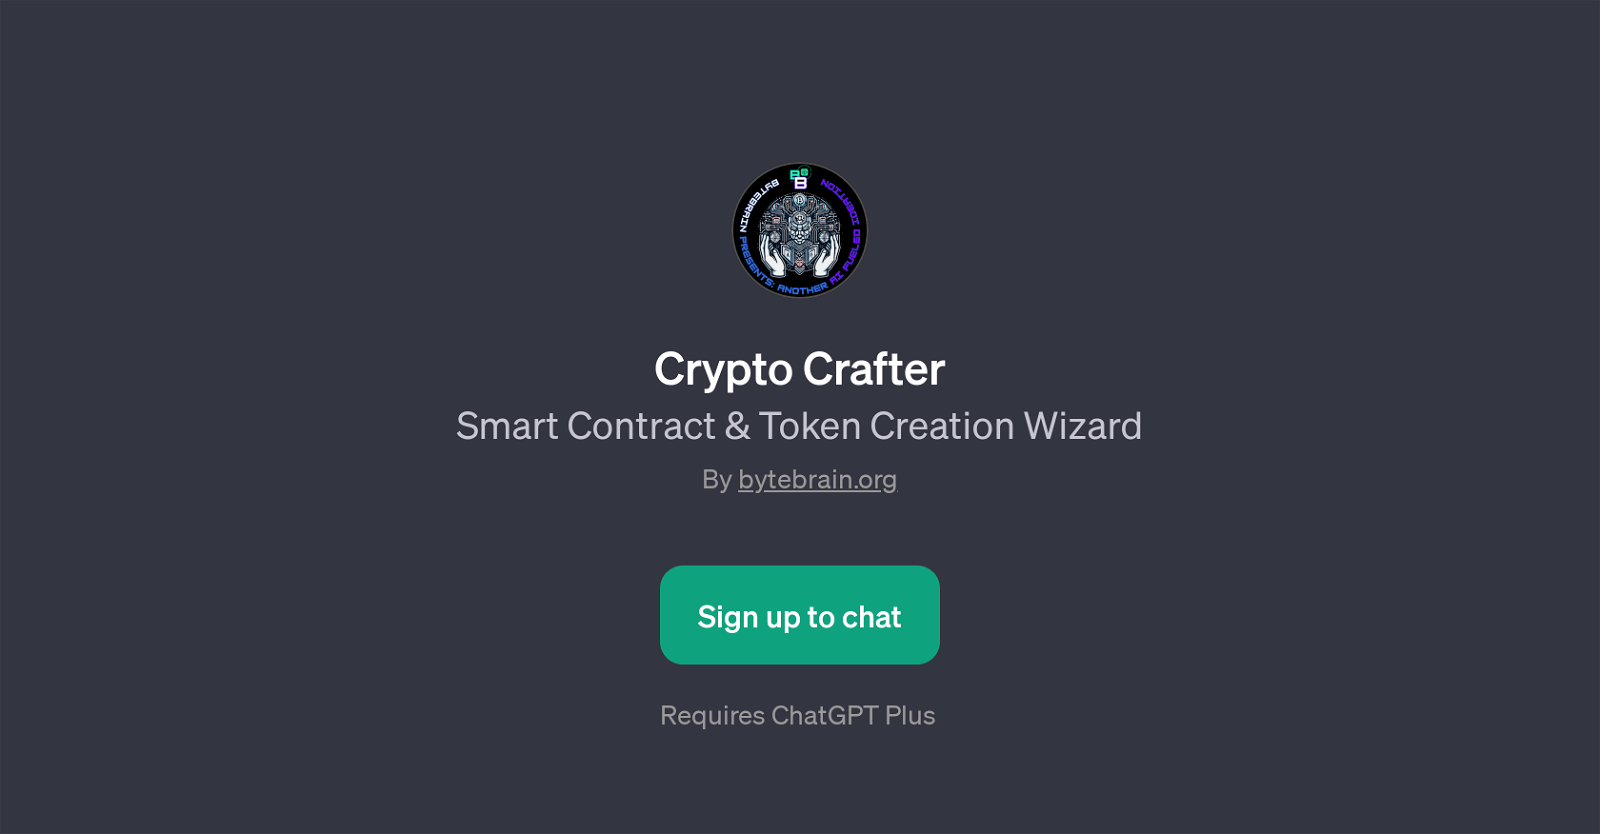 Crypto Crafter website